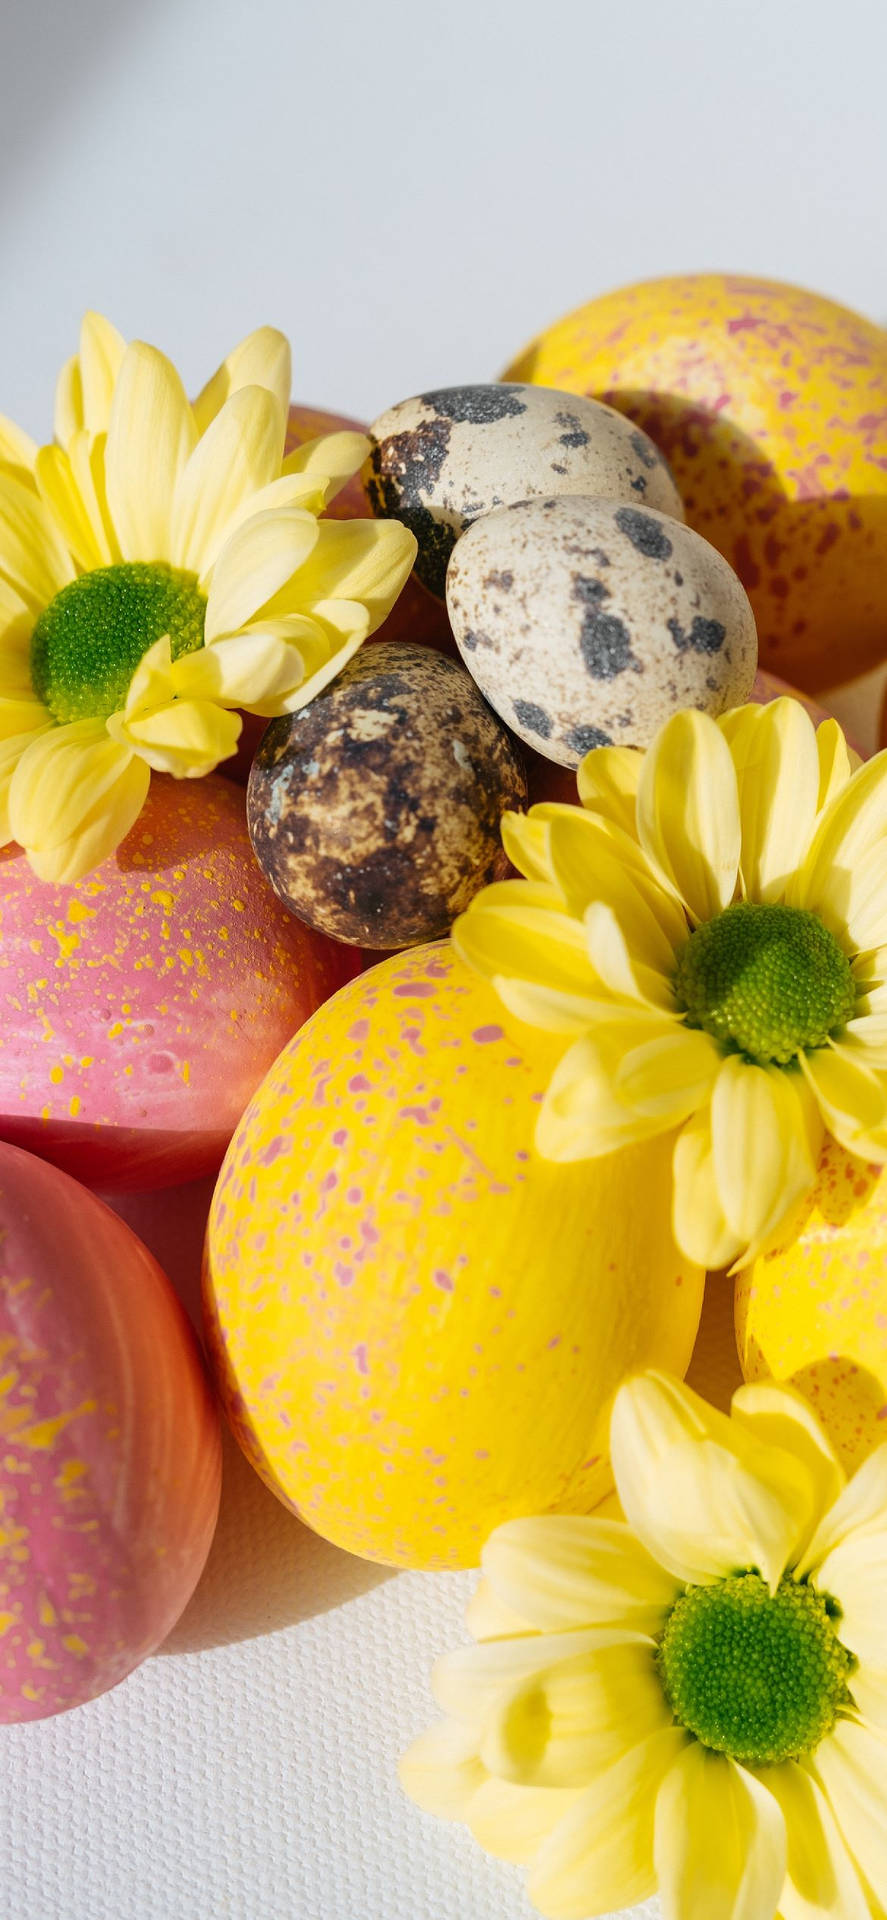 Celebrate #Easter with a new phone! Wallpaper